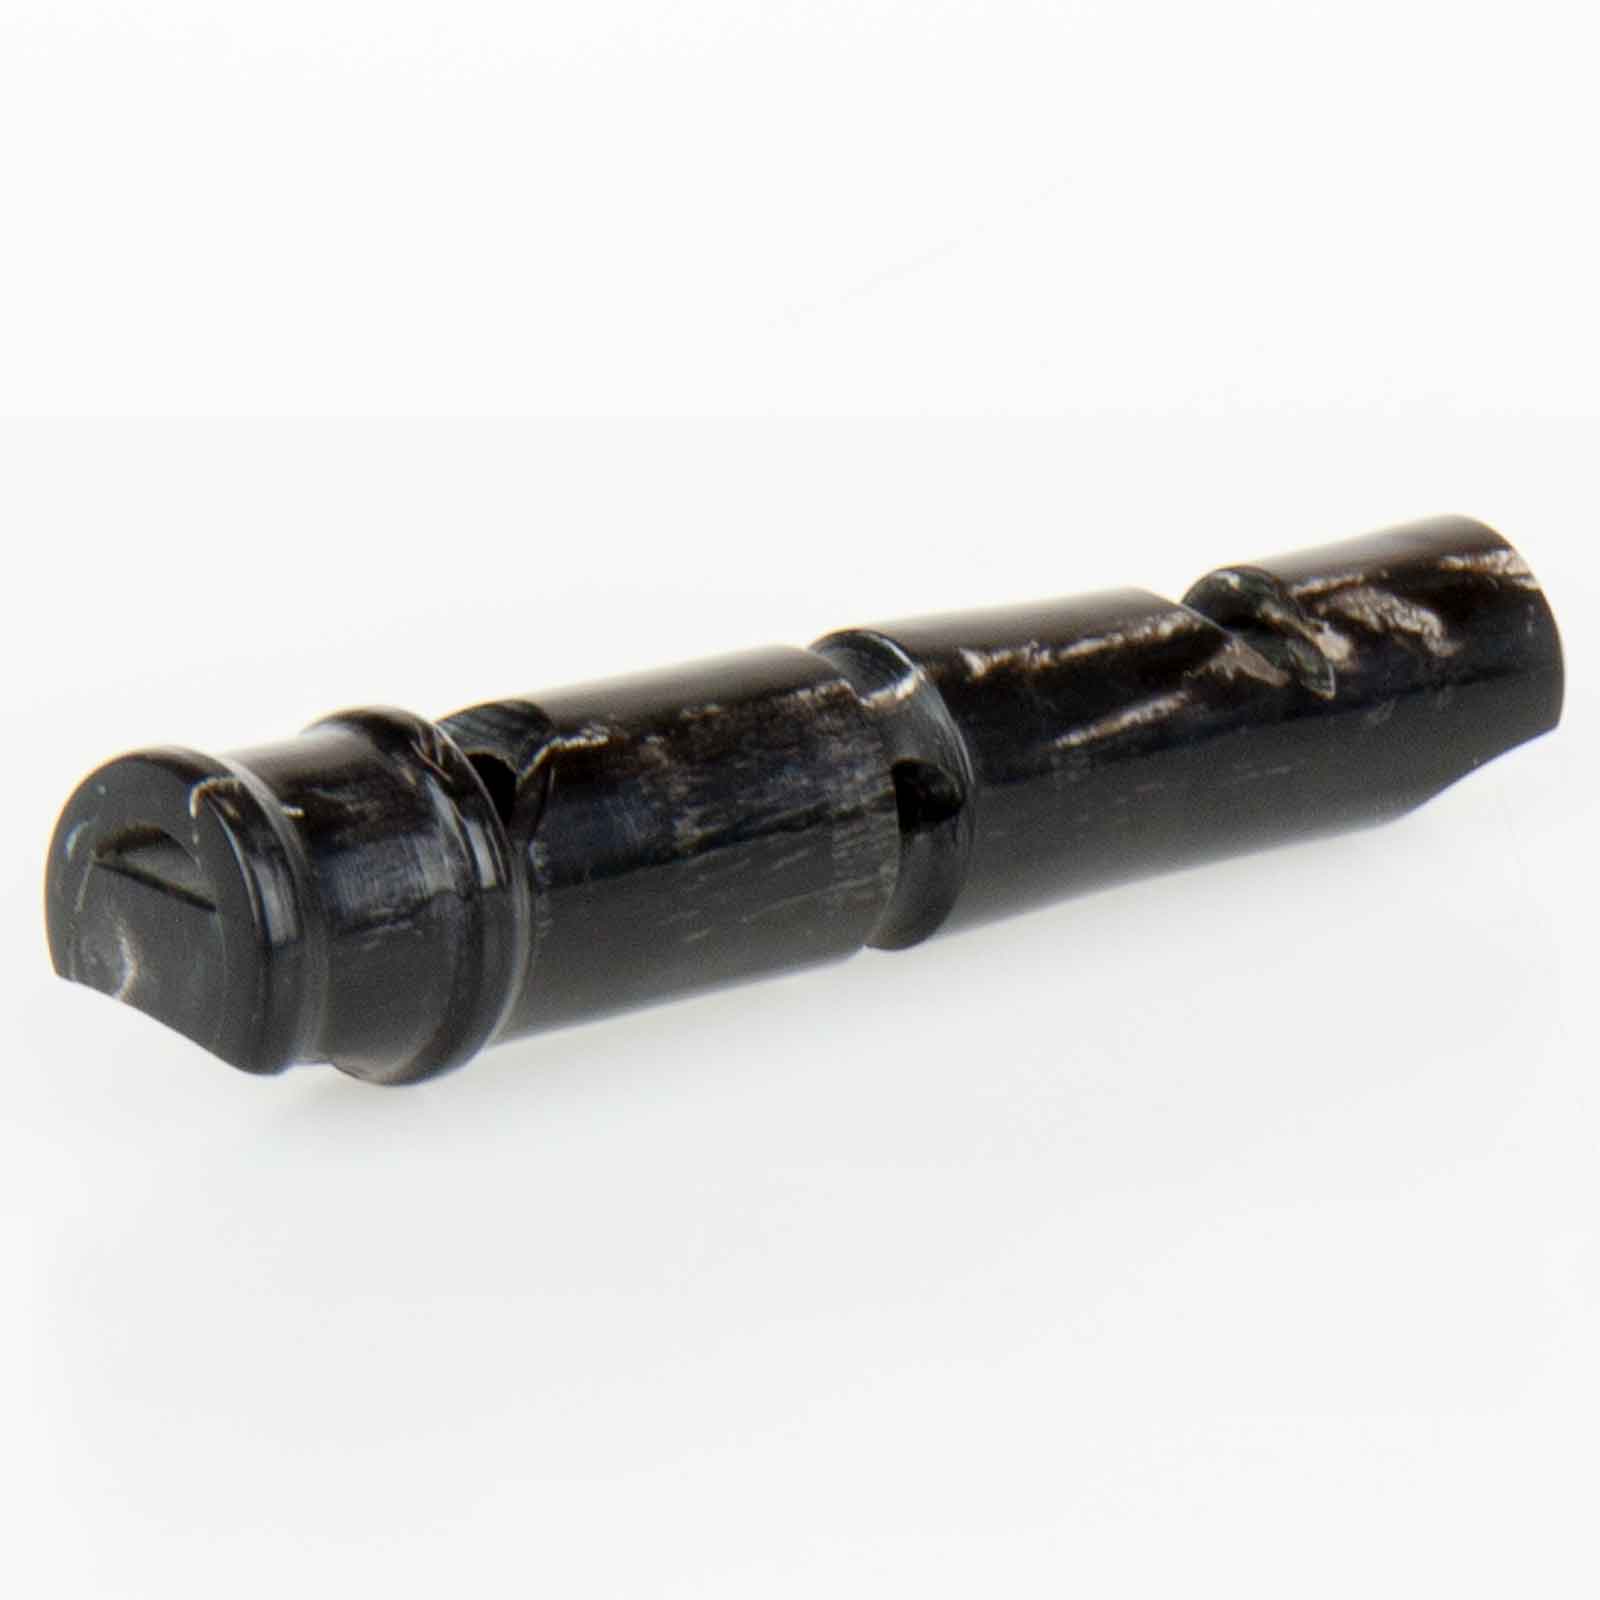 Dog Pipe Made Of Buffalo Horn About 8.5 Cm